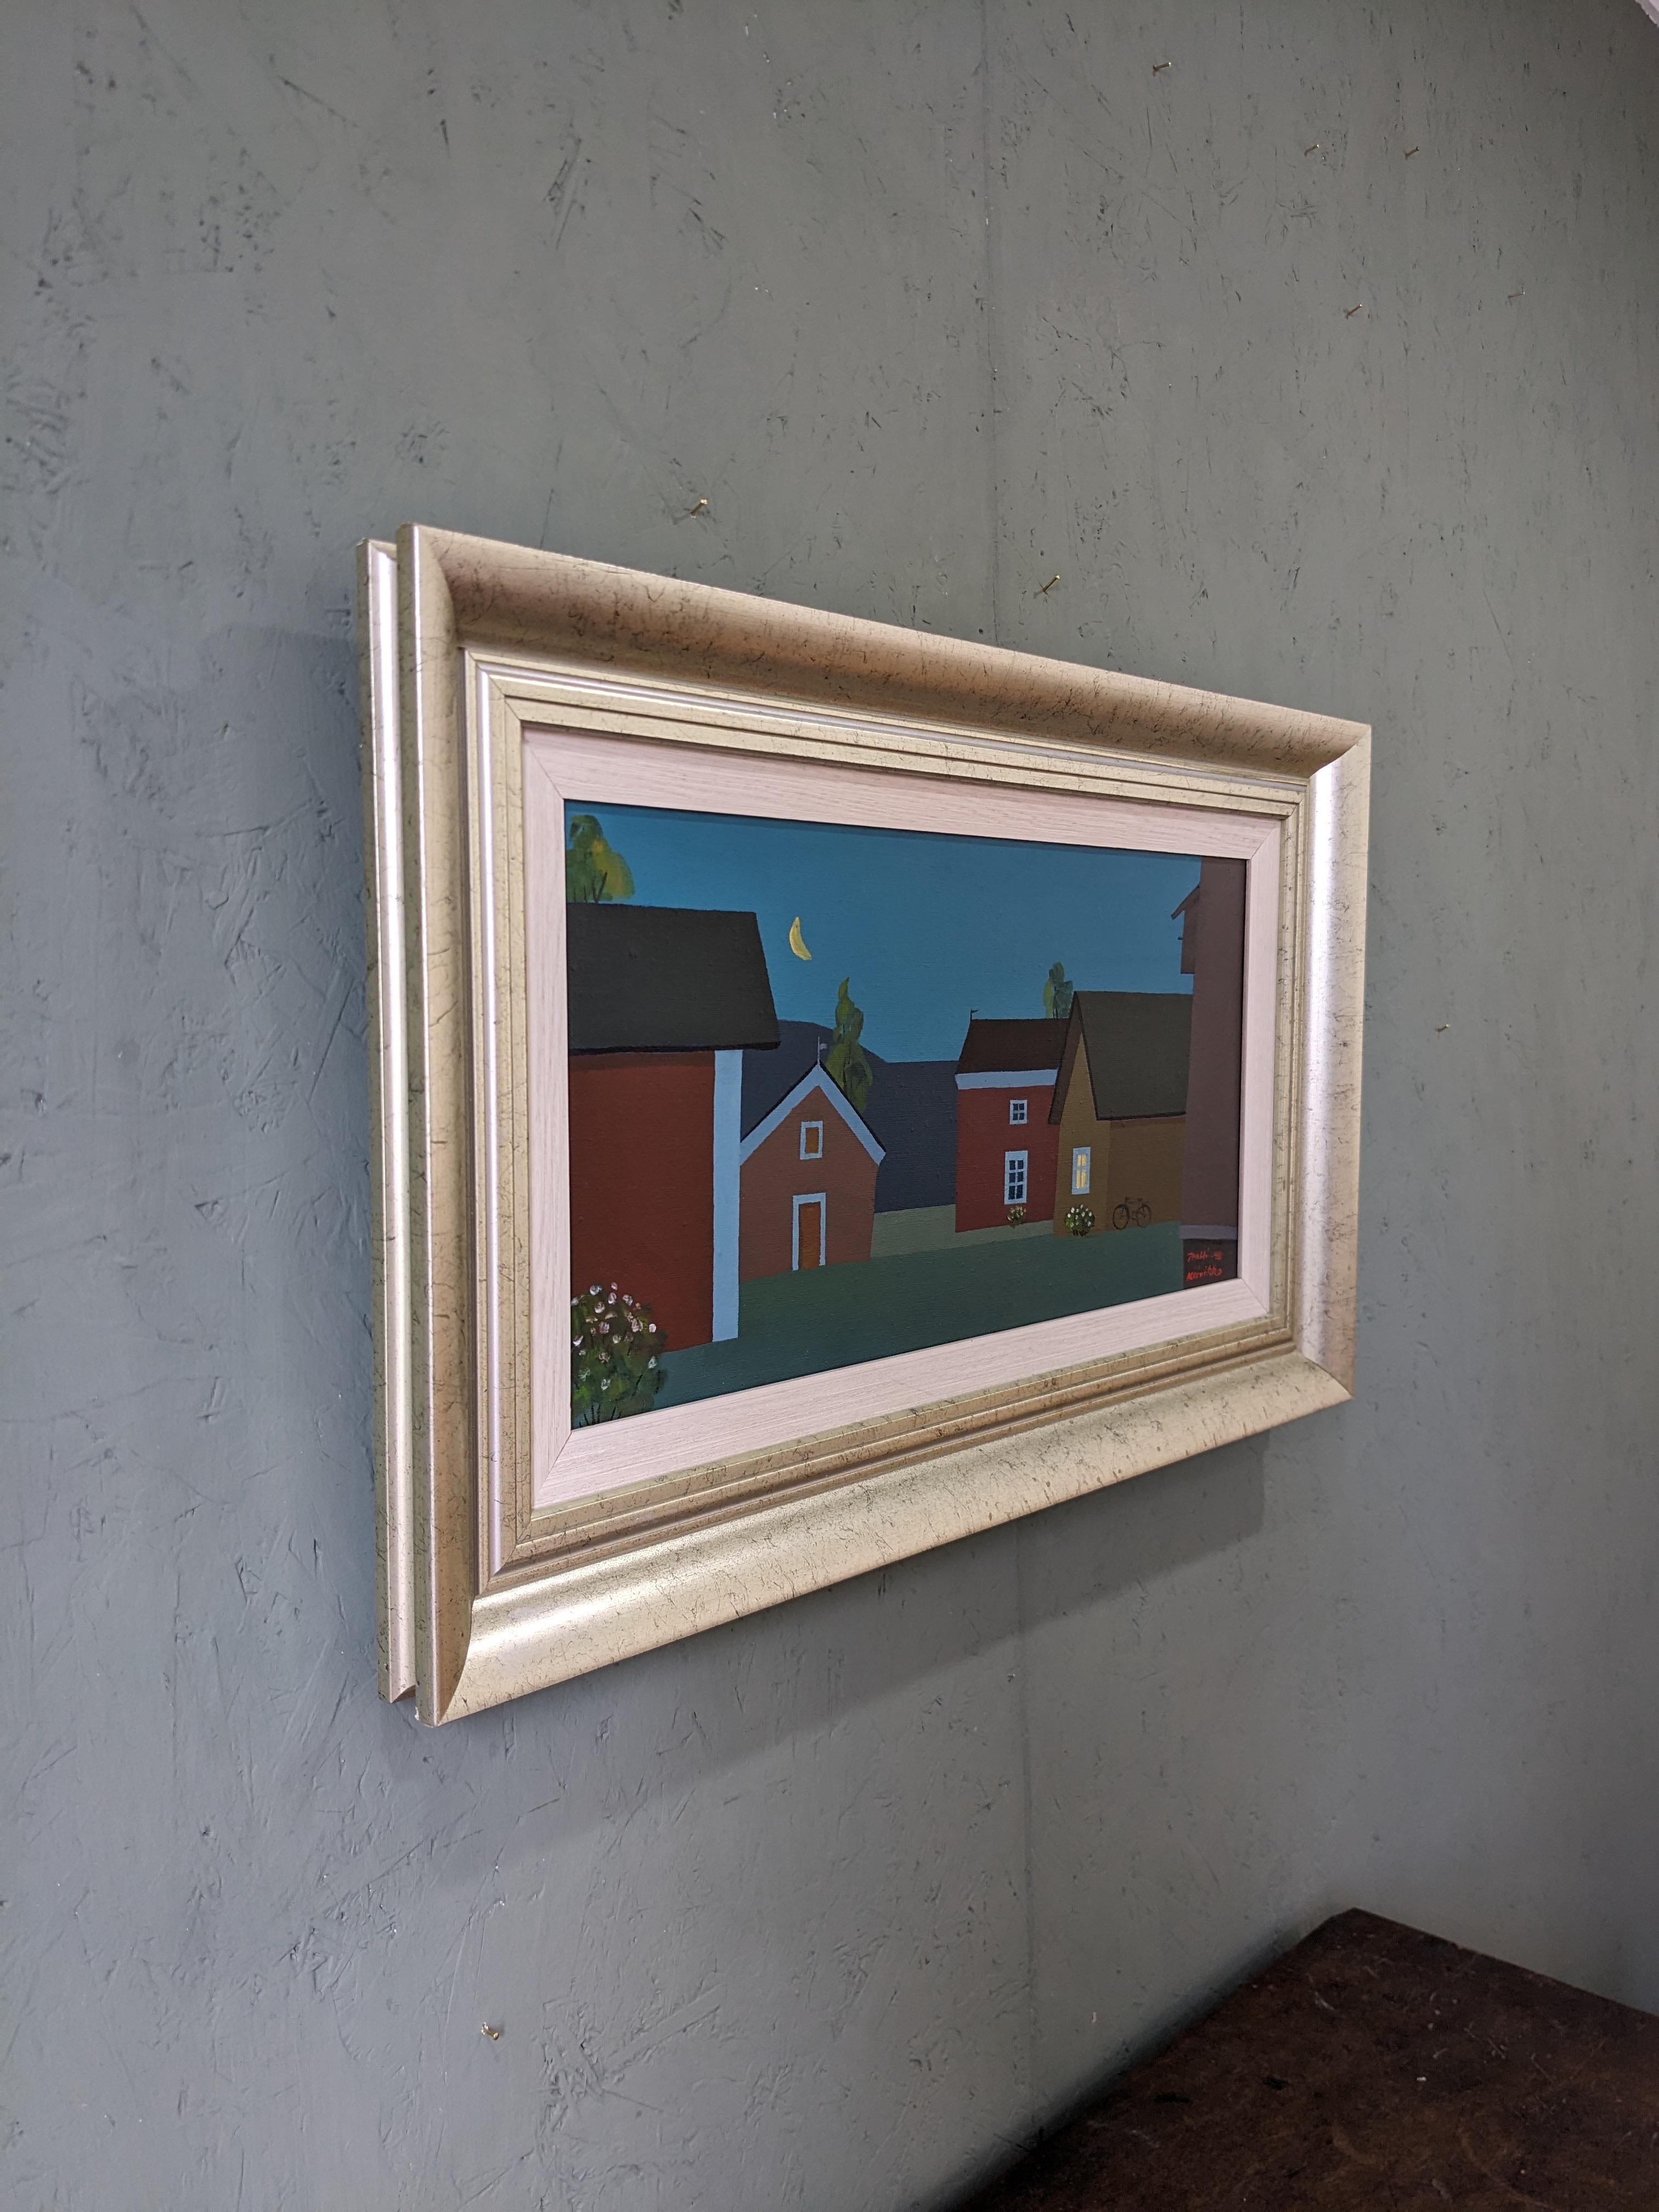 HOUSES AT MIDNIGHT
Size: 40 x 65 cm (including frame)
Oil on canvas

A delightful modernist-style composition, executed in oil onto canvas and dated 1998.

This picturesque composition presents a night scene of a quiet neighborhood filled with